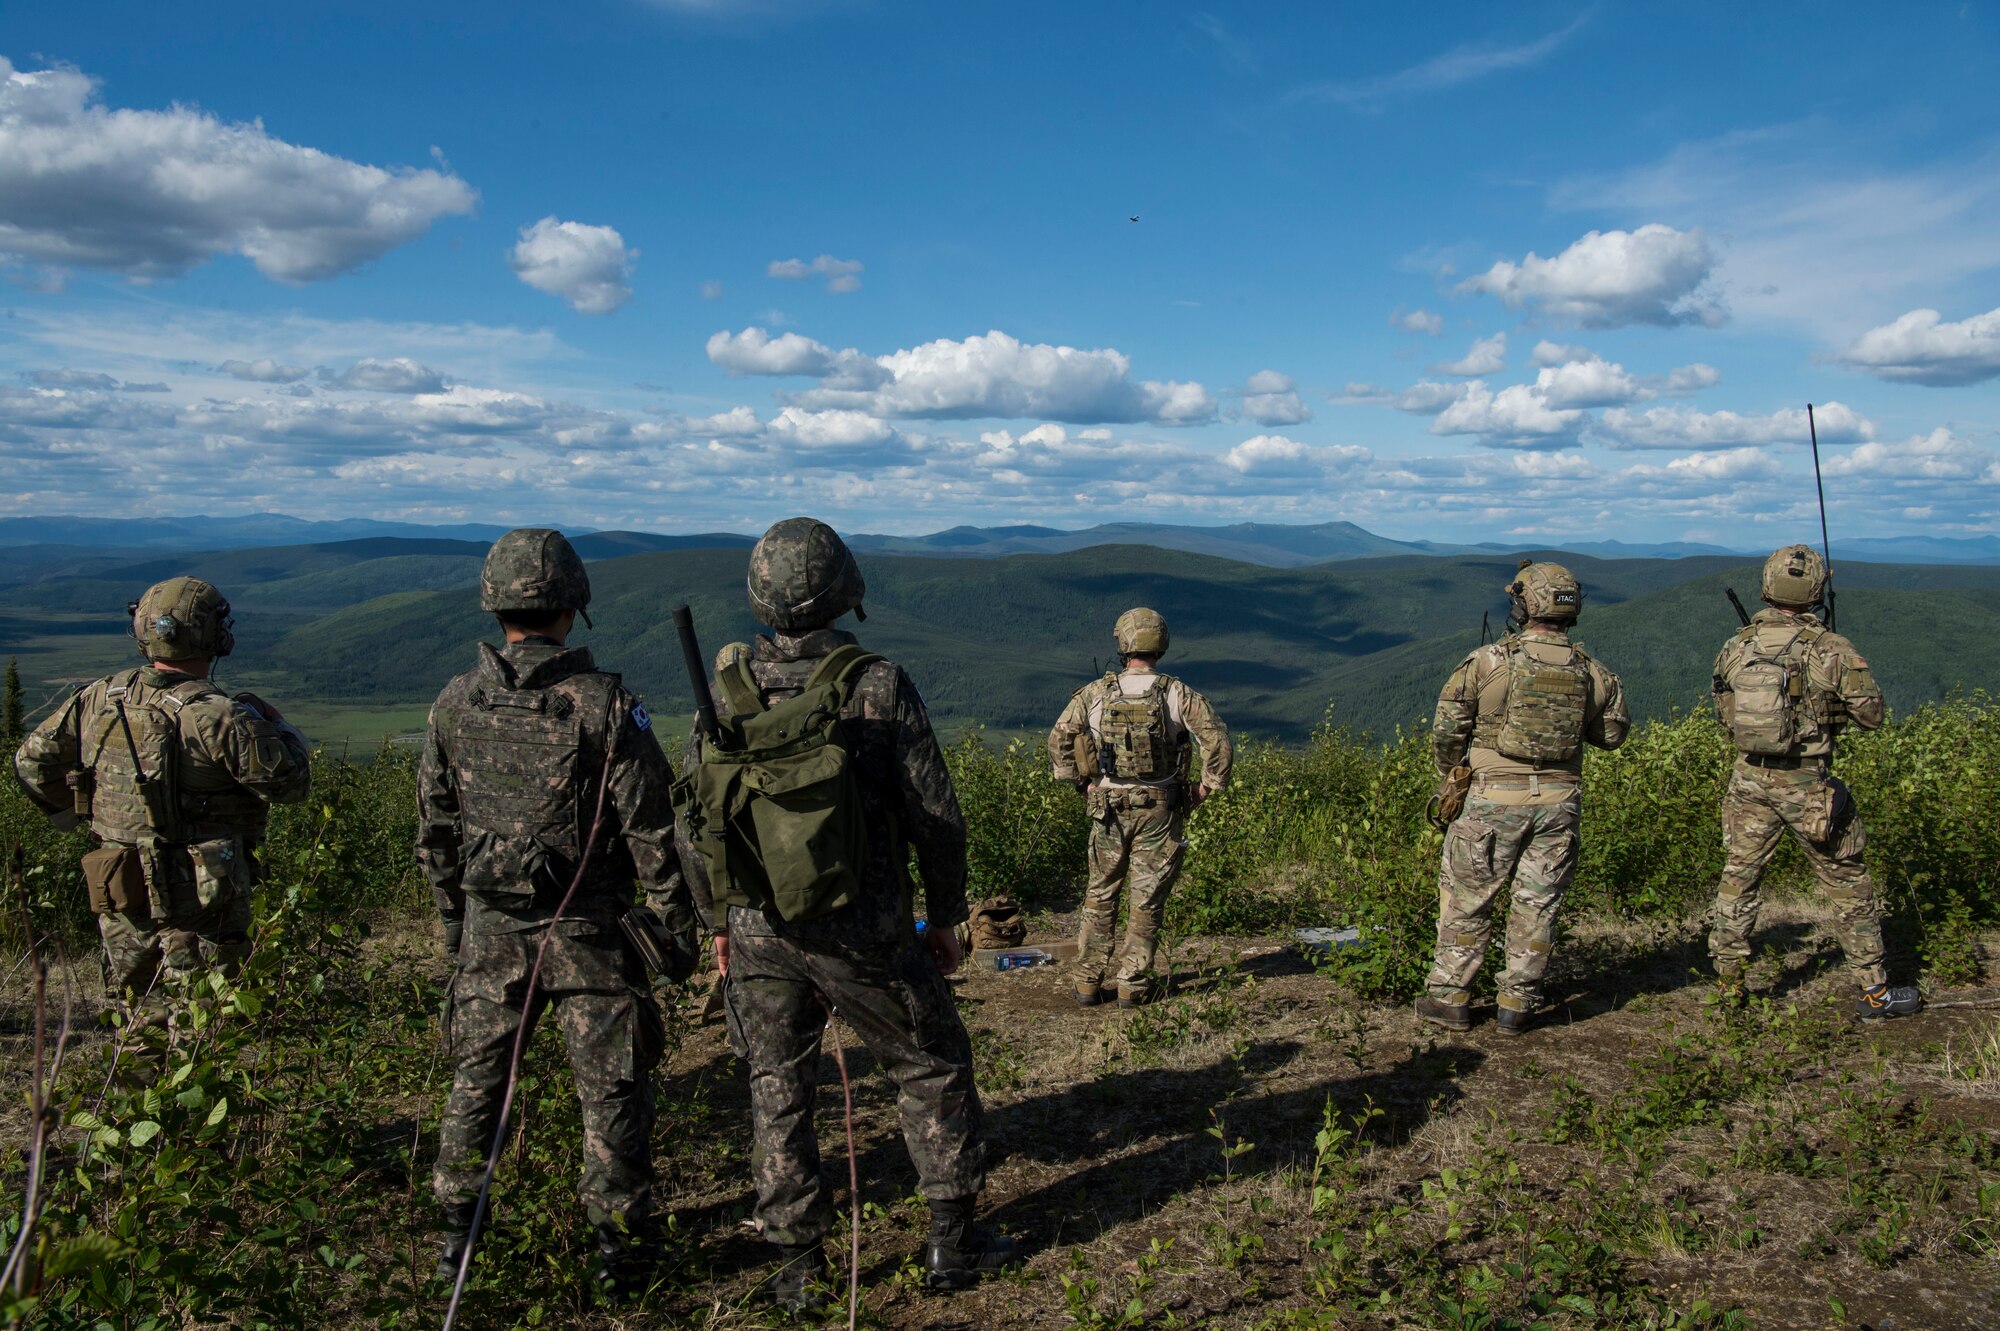 U.S. Air Force and Republic of Korea Air Force Joint Terminal Attack Controllers conduct close air support training mission during RED FLAG-Alaska 19-2 at Eielson Air Force Base, Alaska, June 12, 2019. This U.S. Pacific Air Forces large force exercise enables U.S. and international forces to strengthen partnerships and improve interoperability by sharing tactics, techniques and procedures for multi-domain operations. (U.S. Air Force photo by Senior Airman Kristen Heller)